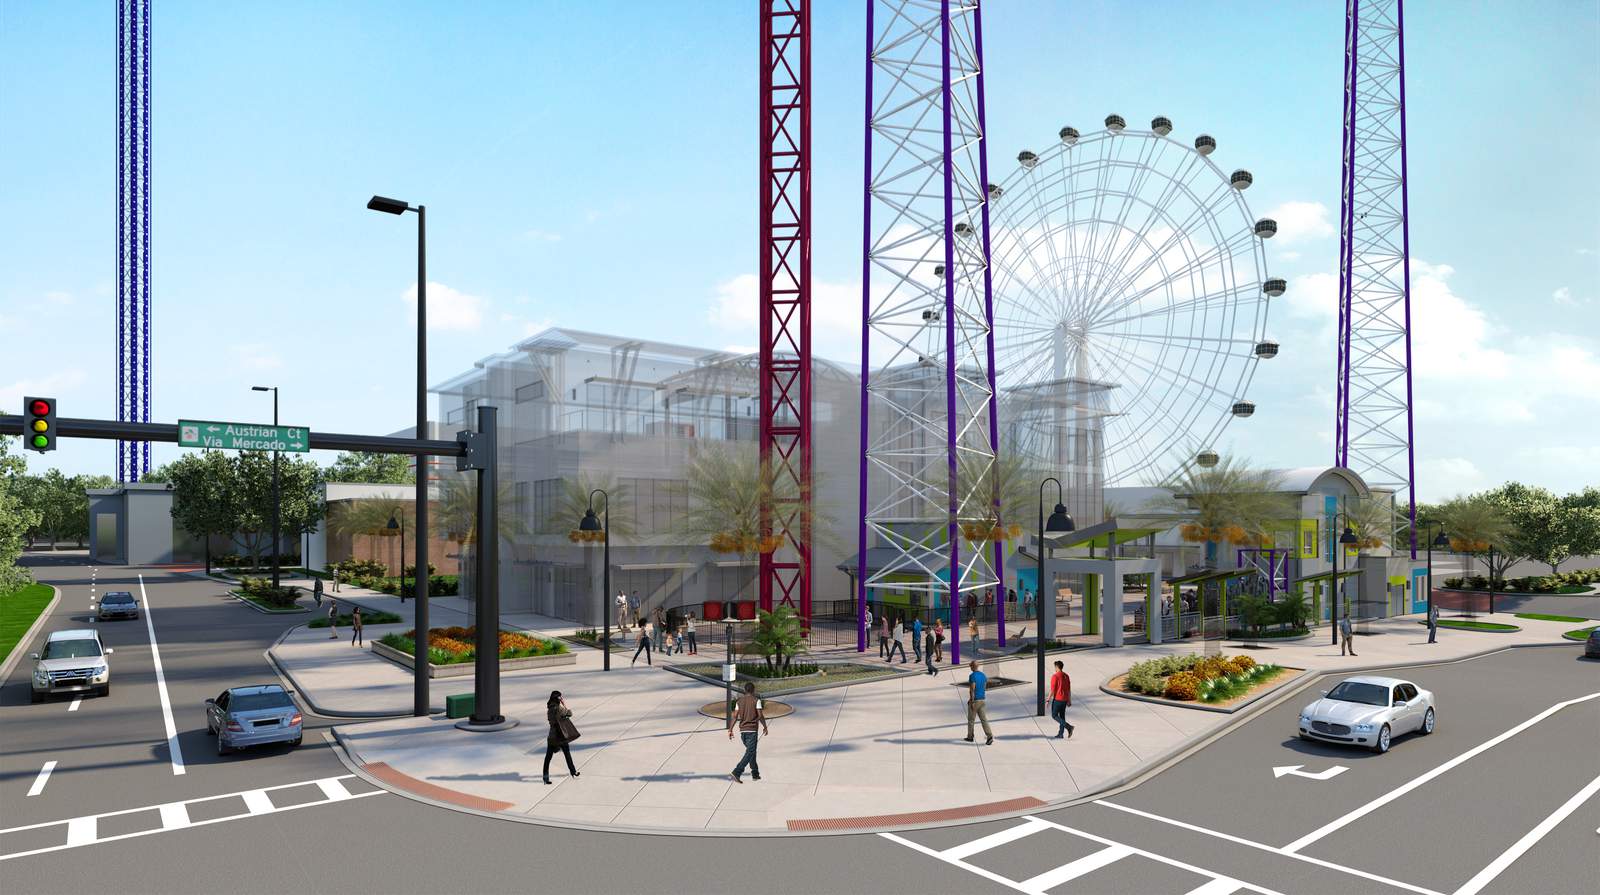 Orlando’s ICON Park getting 2 new record-setting attractions in 2021